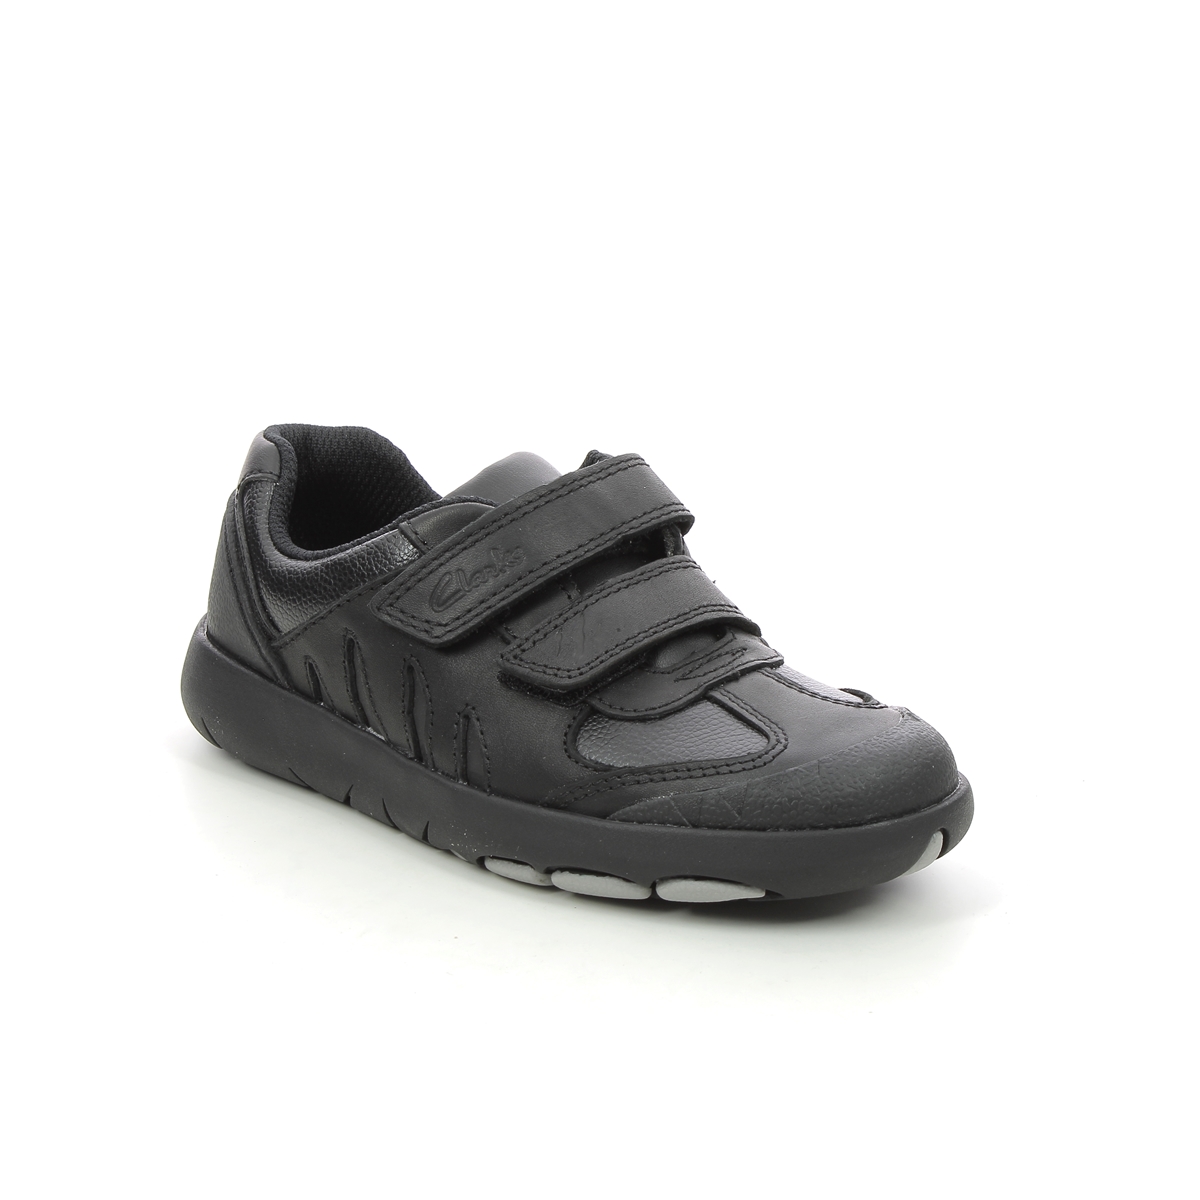 Clarks Rex Stride K Black Leather Kids Boys Shoes 626987G In Size 12.5 In Plain Black Leather G Width Fitting For School For kids